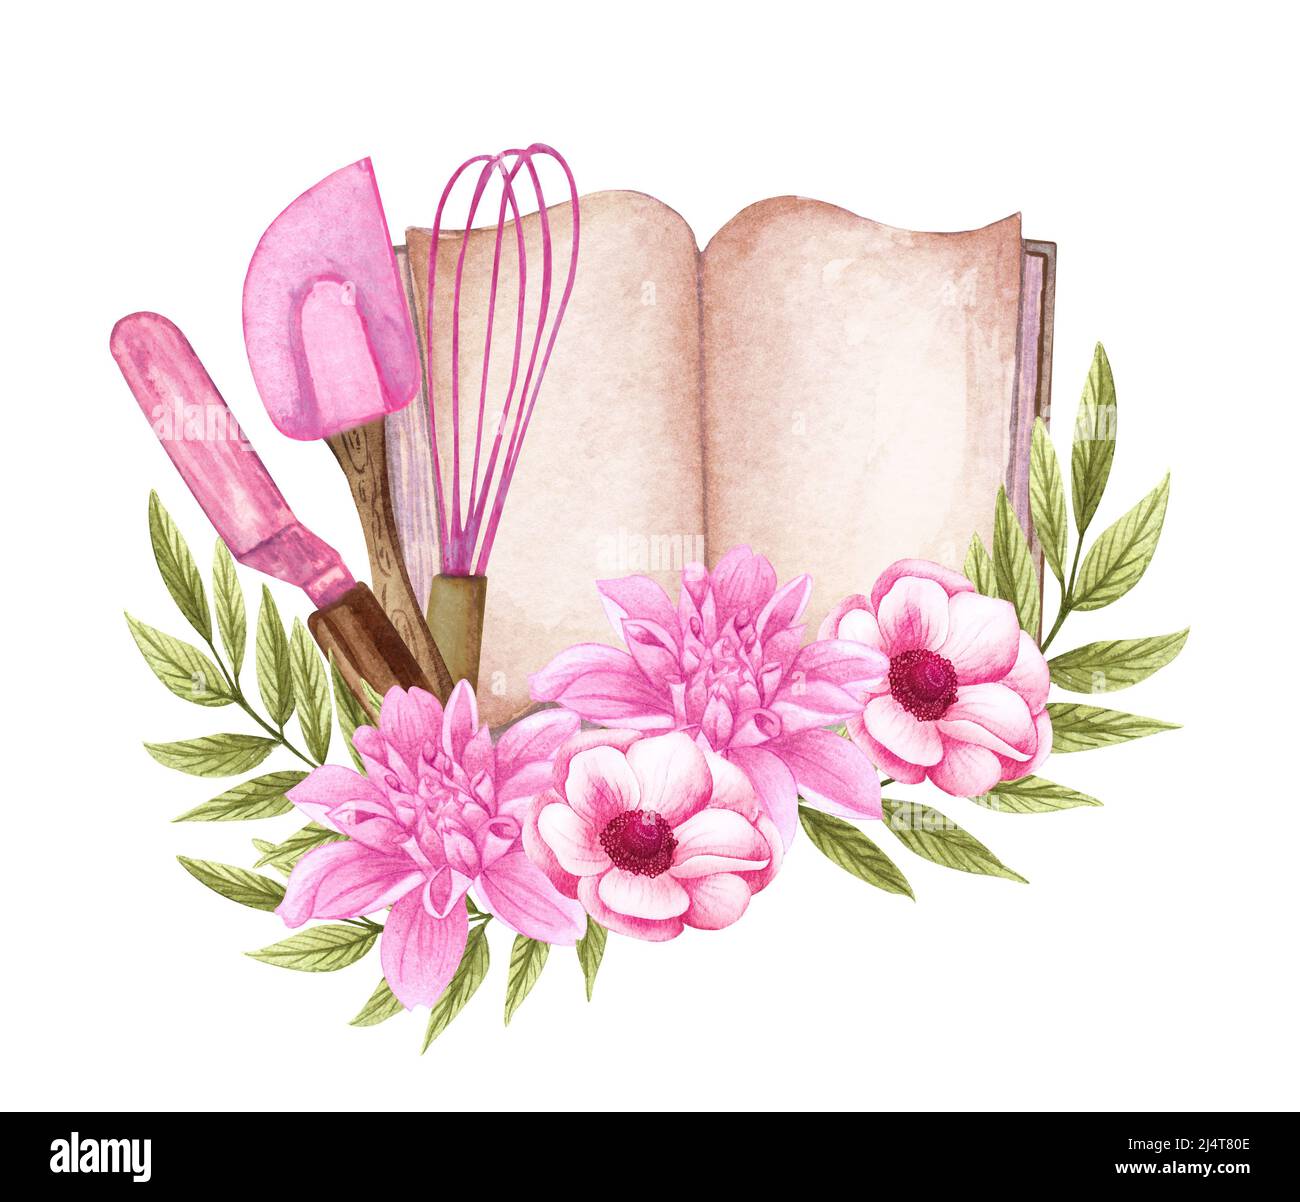 https://c8.alamy.com/comp/2J4T80E/baking-watercolor-illustration-with-kitchen-utensils-cooking-book-polling-pin-whisk-spoon-with-pink-flowers-hand-drawn-cooking-baking-logo-2J4T80E.jpg